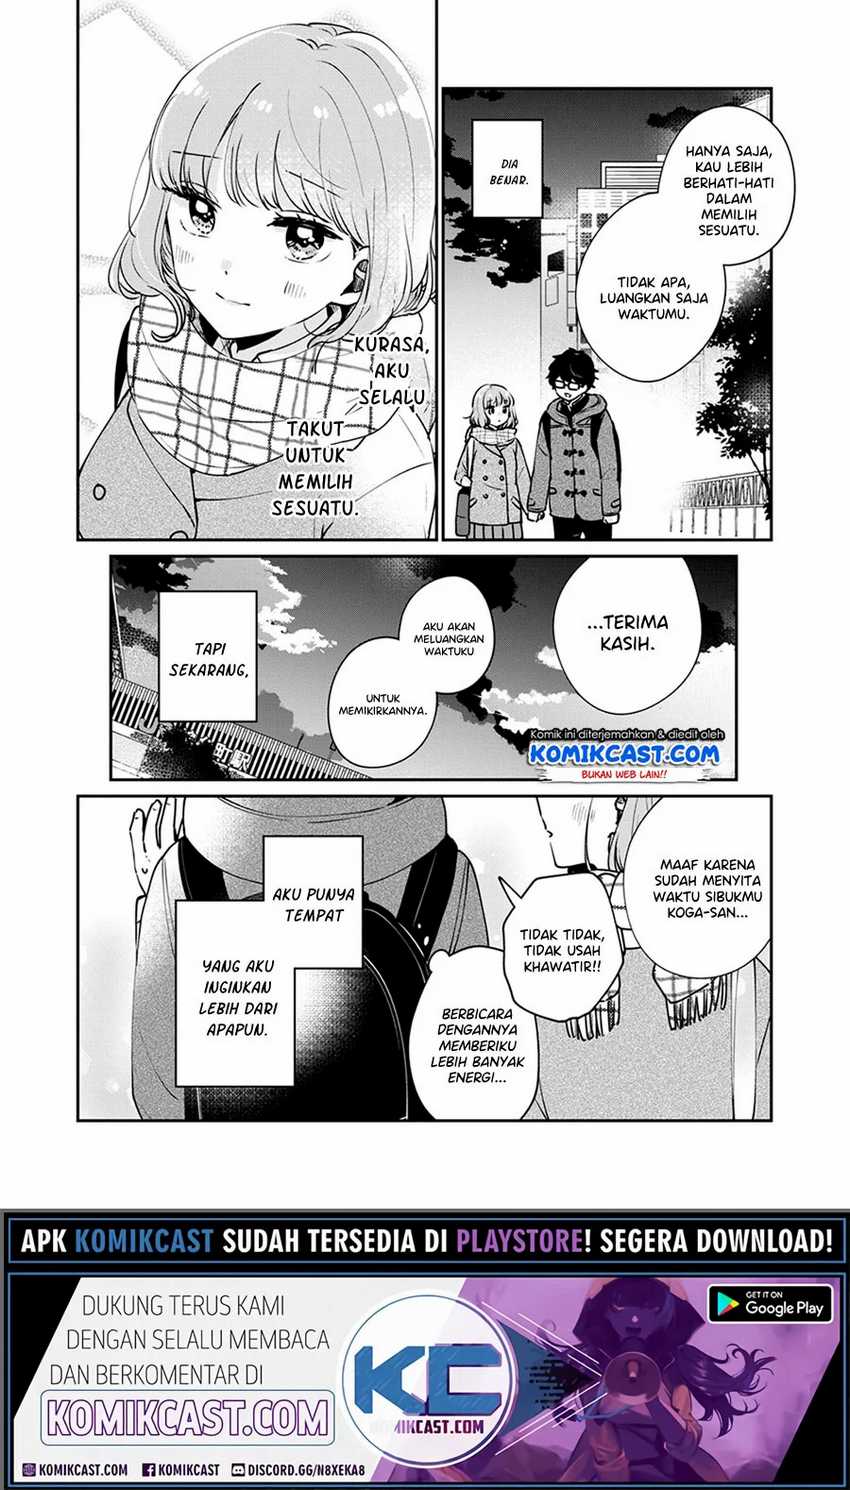 It’s Not Meguro-san’s First Time Chapter 40